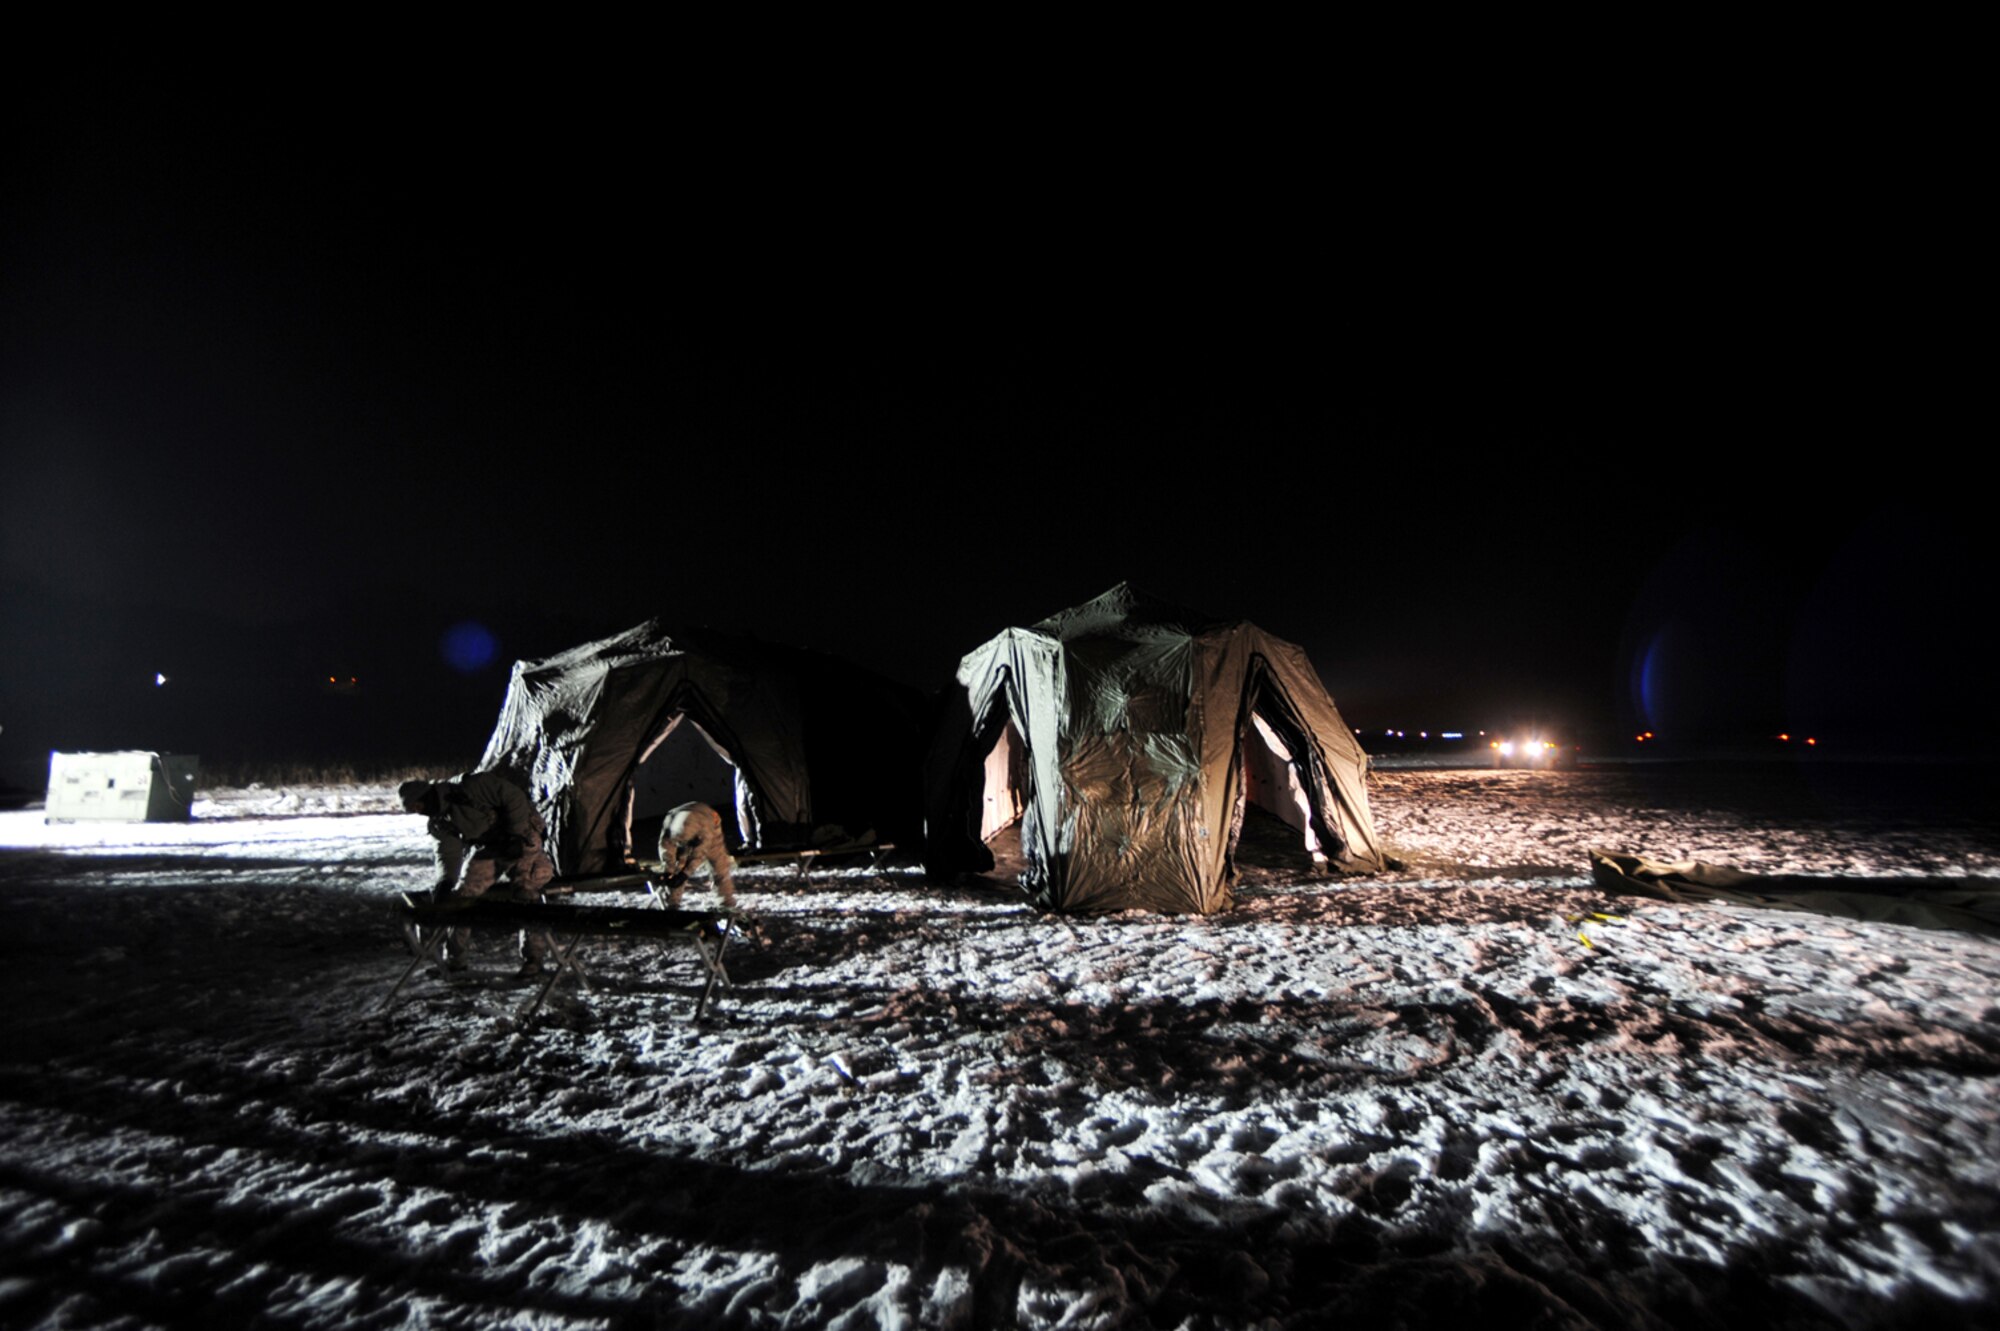 U.S. Air Force members set up tents after their arrival at Flugplatz Bitburg, Germany, Jan. 26, 2010, in preparation of Ramstein's operational readiness inspection in September. The units are setting up bare-base operations as part of the dual-wing operational readiness exercise with the 86th Airlift Wing. This is the second of five operational readiness exercises. (U.S. Air Force photo by Staff Sgt. Sarayuth Pinthong)